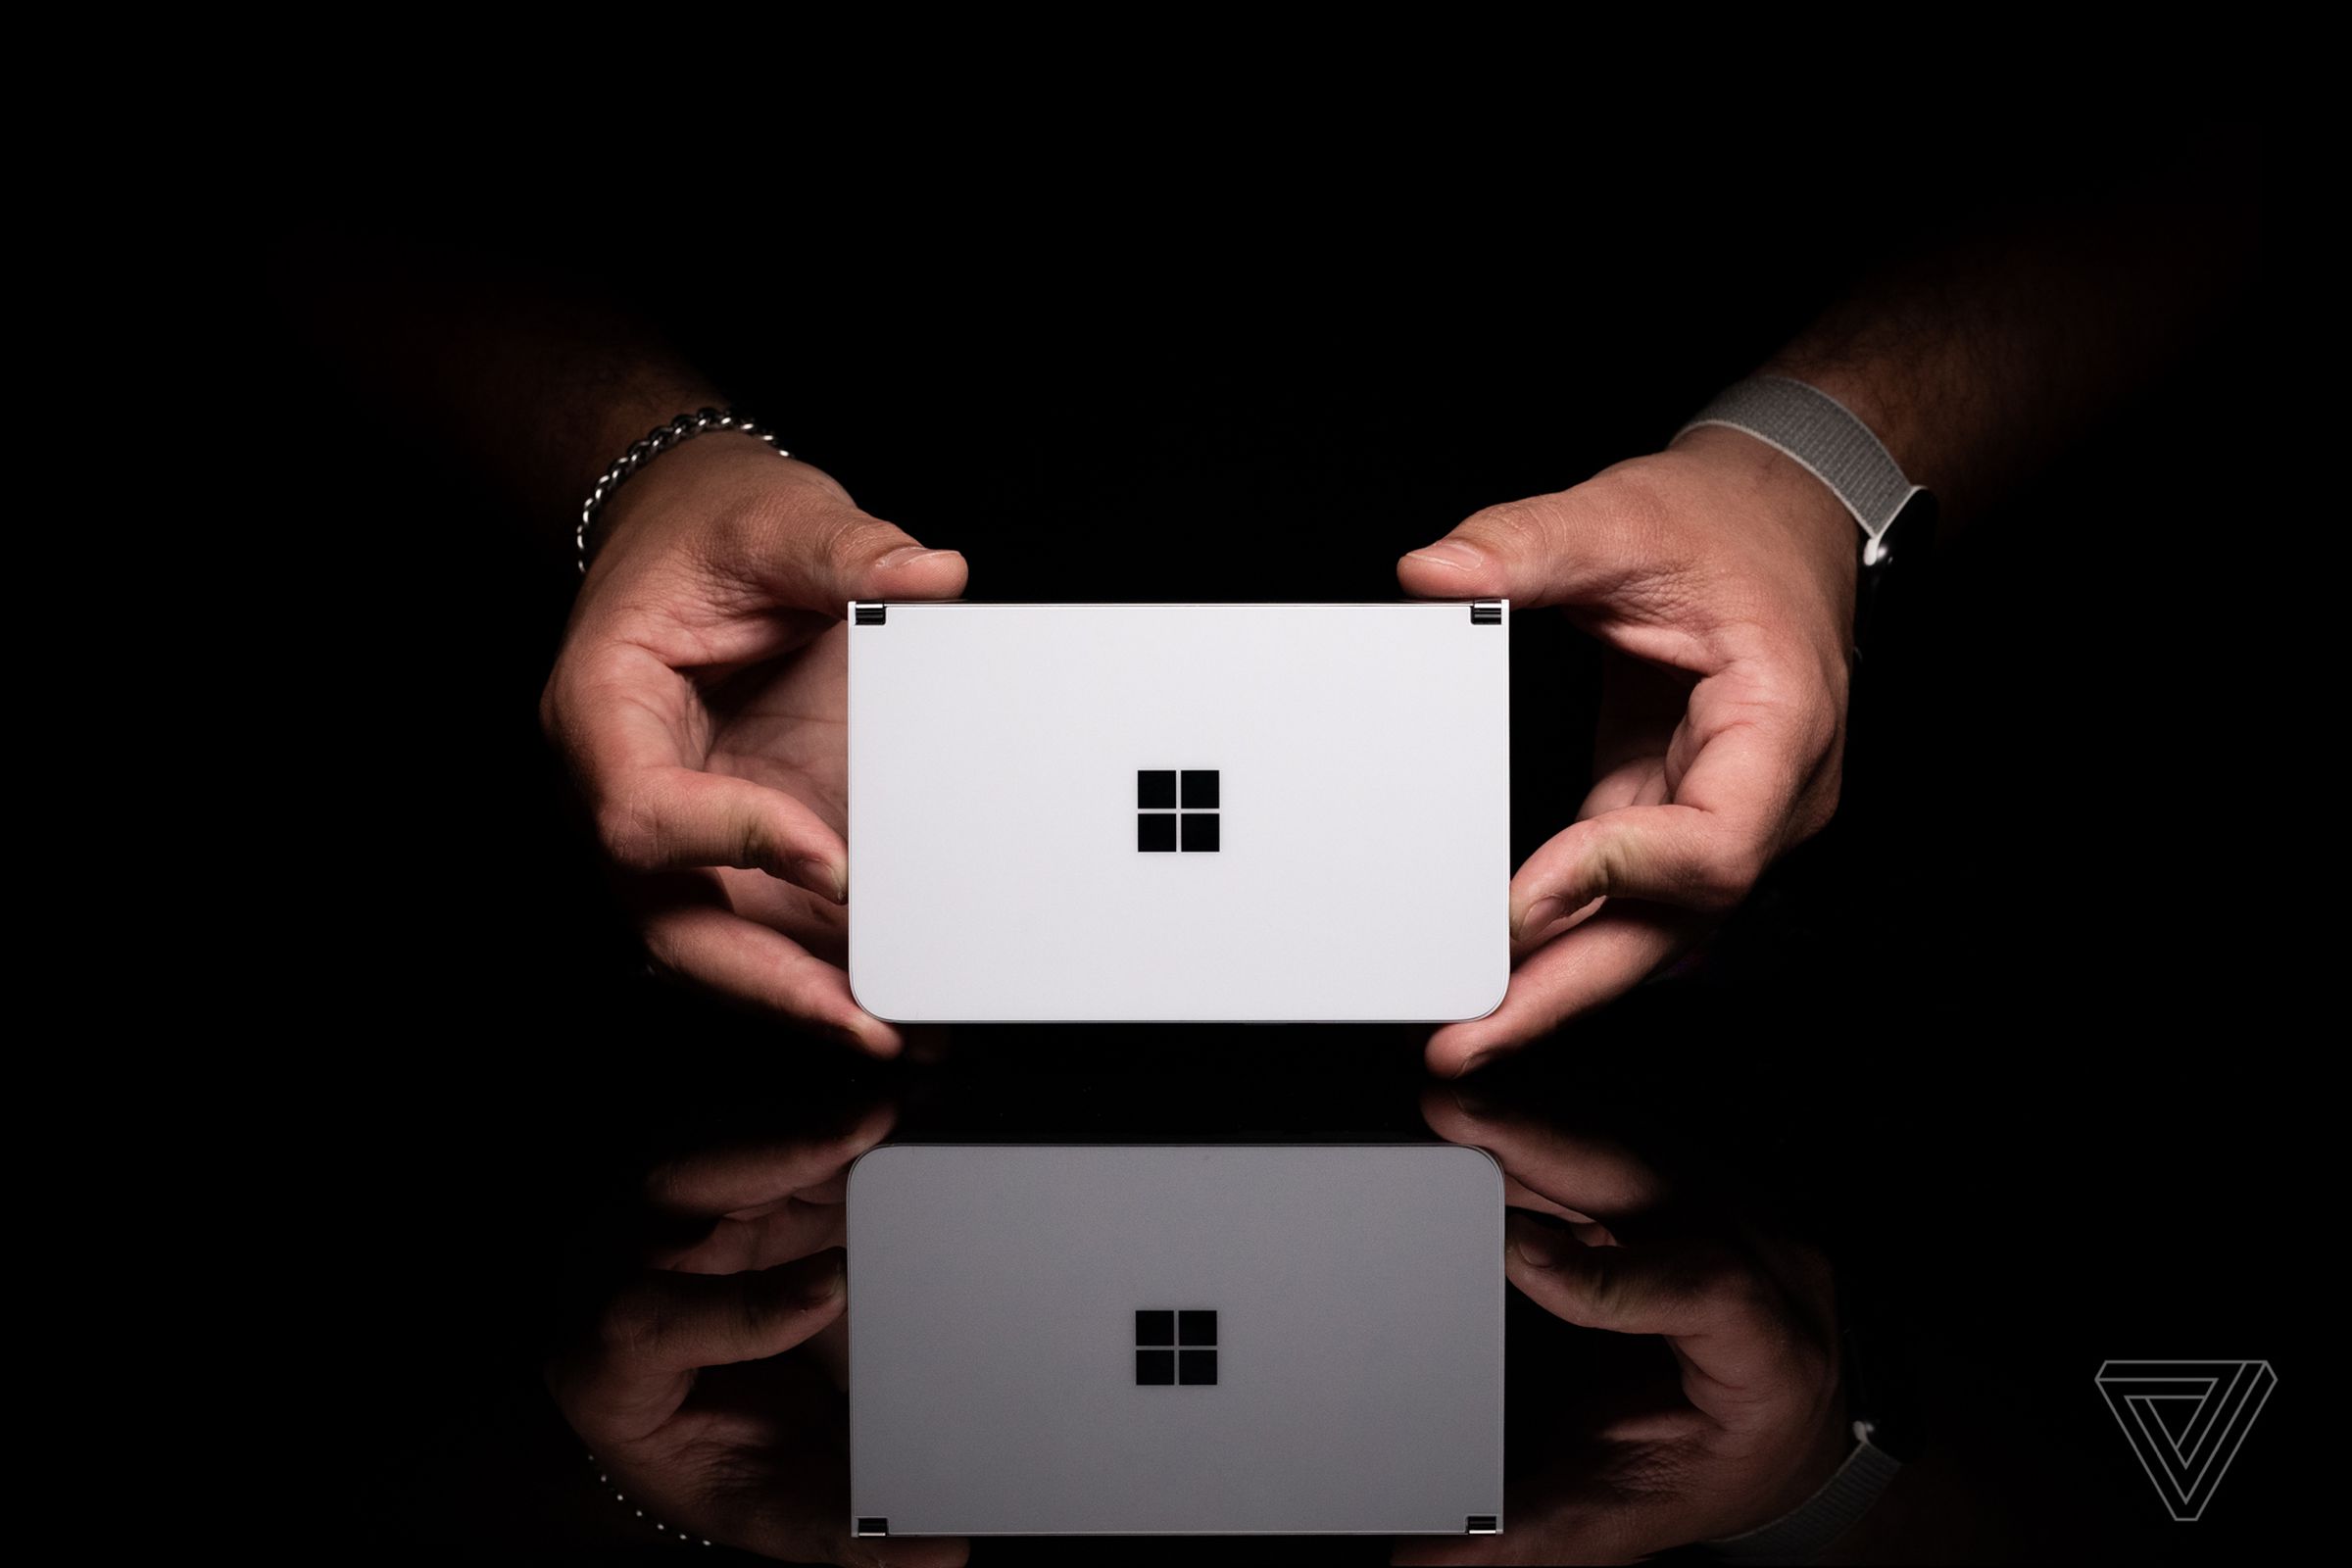 The Microsoft Surface Duo has no screens or cameras on the outside when closed